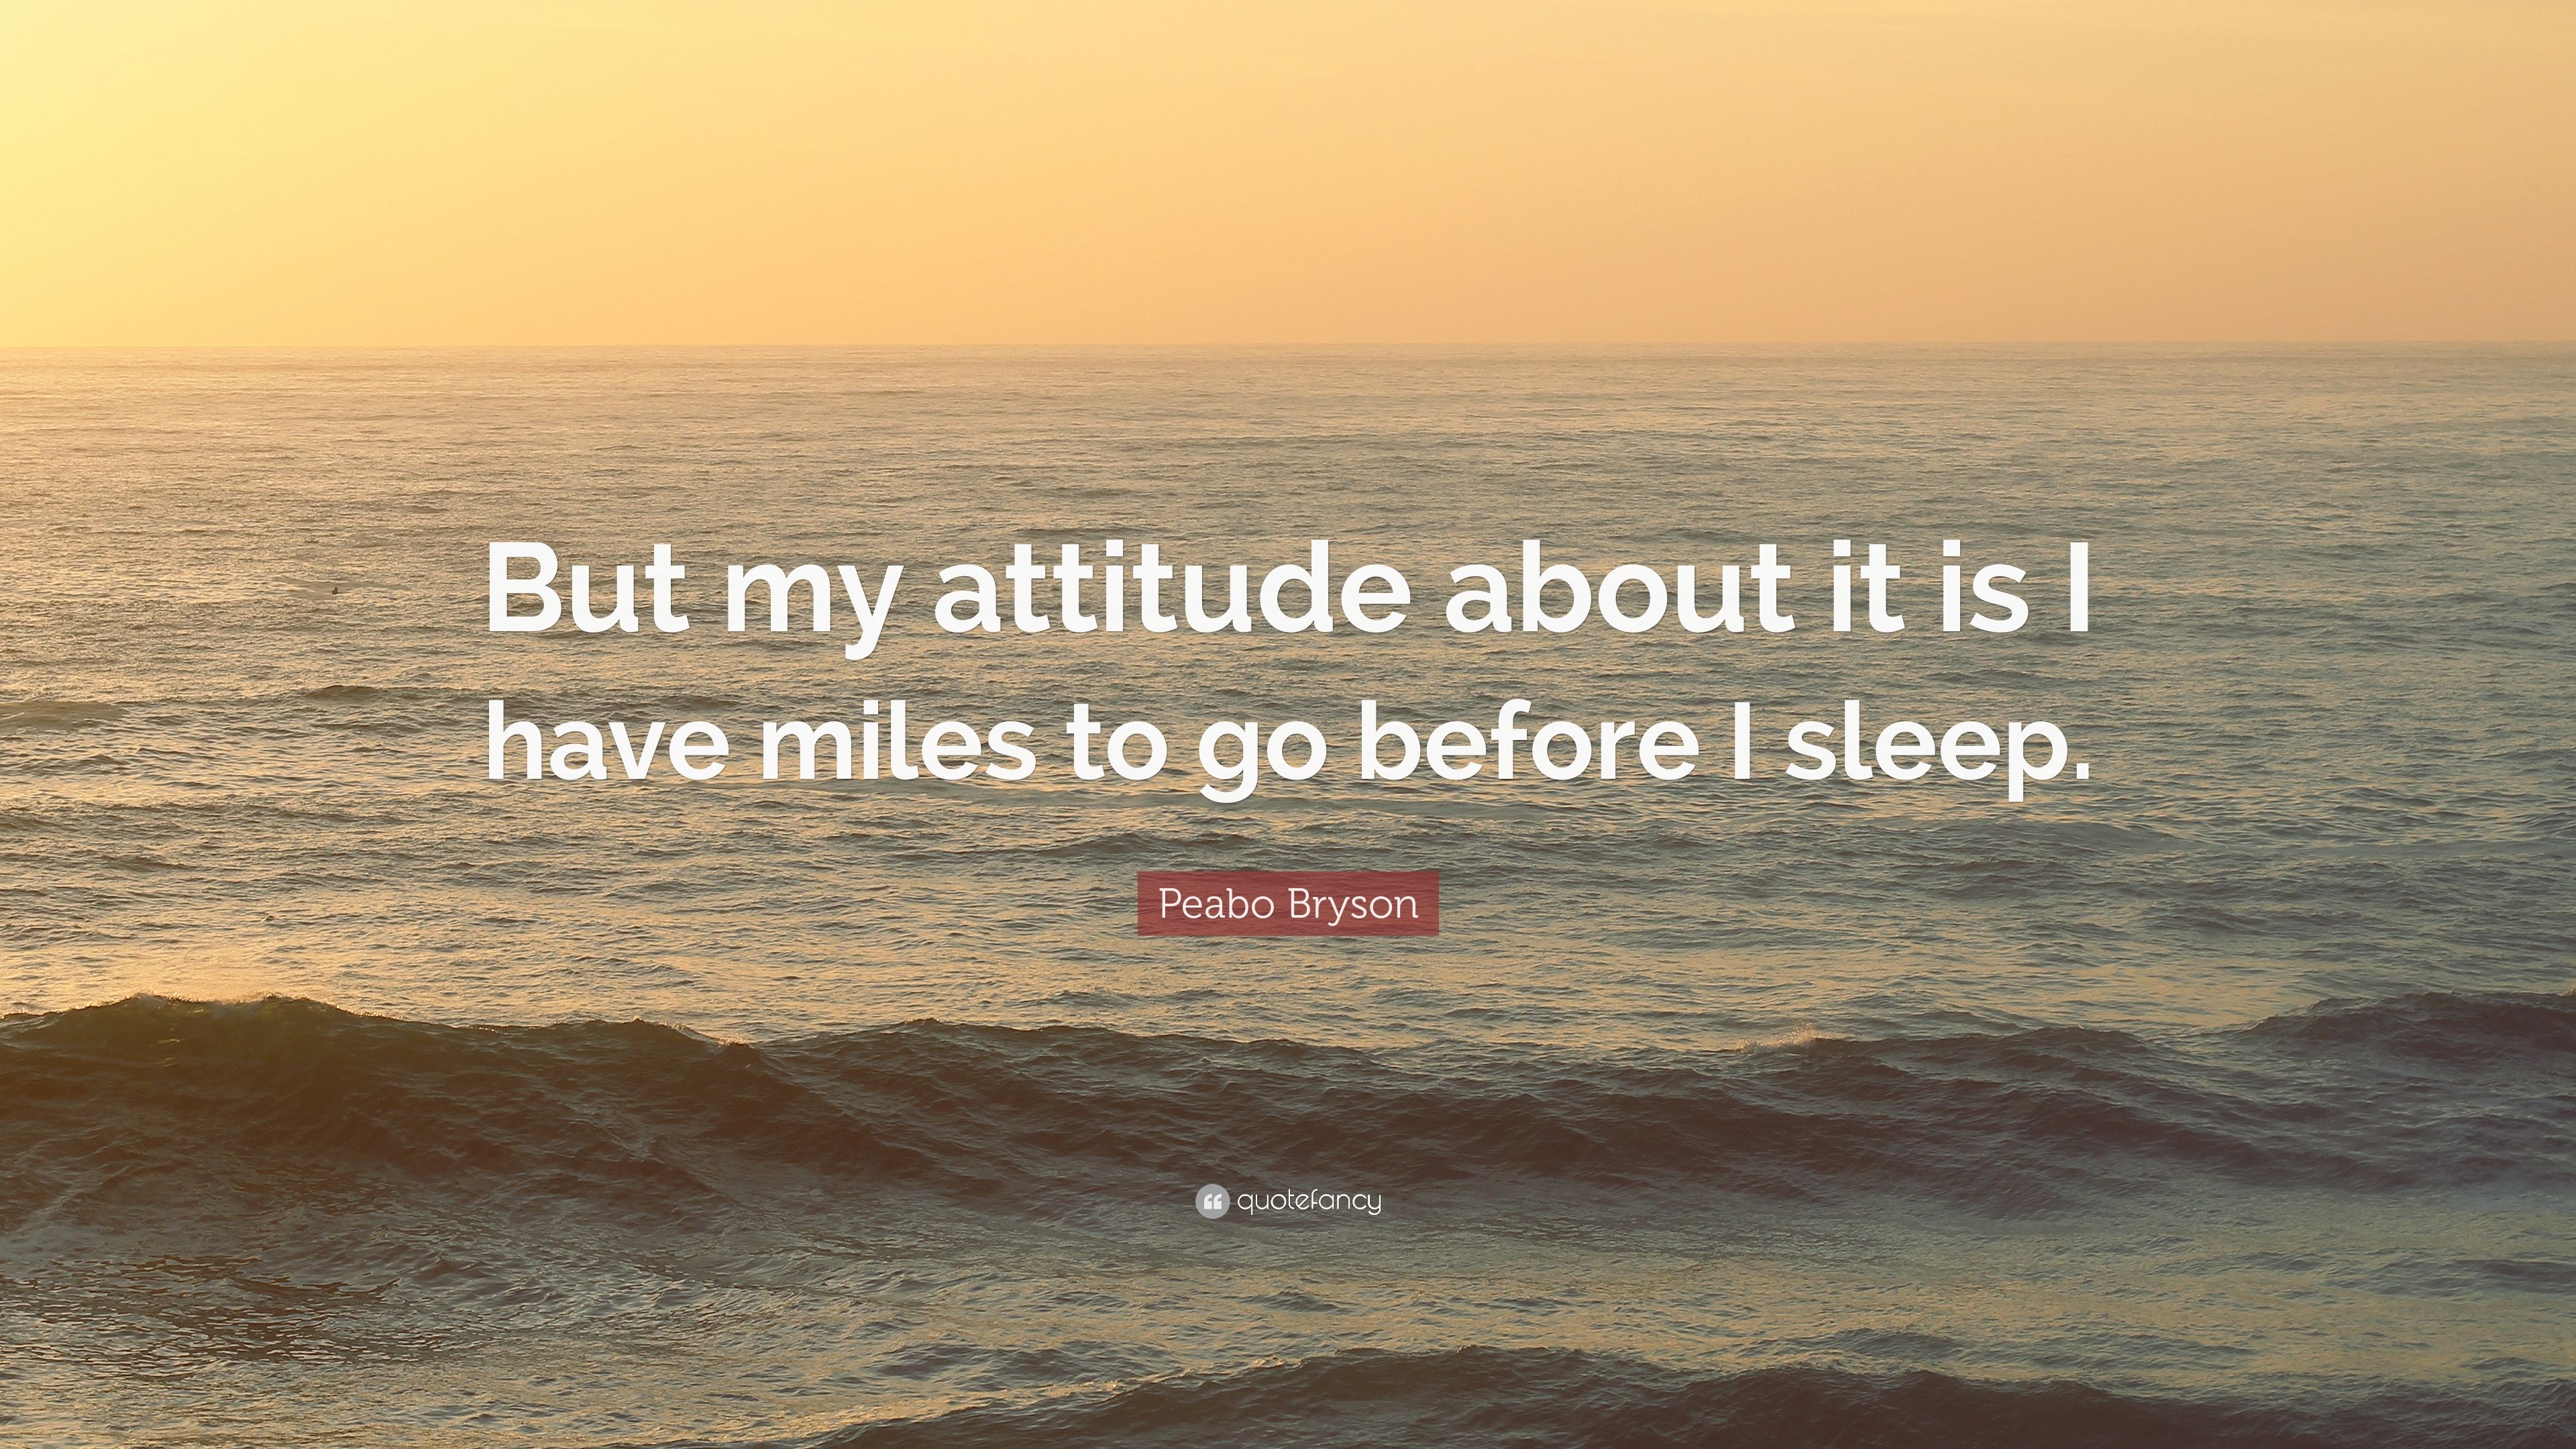 Peabo Bryson Quote: “But my attitude about it is I have miles to go